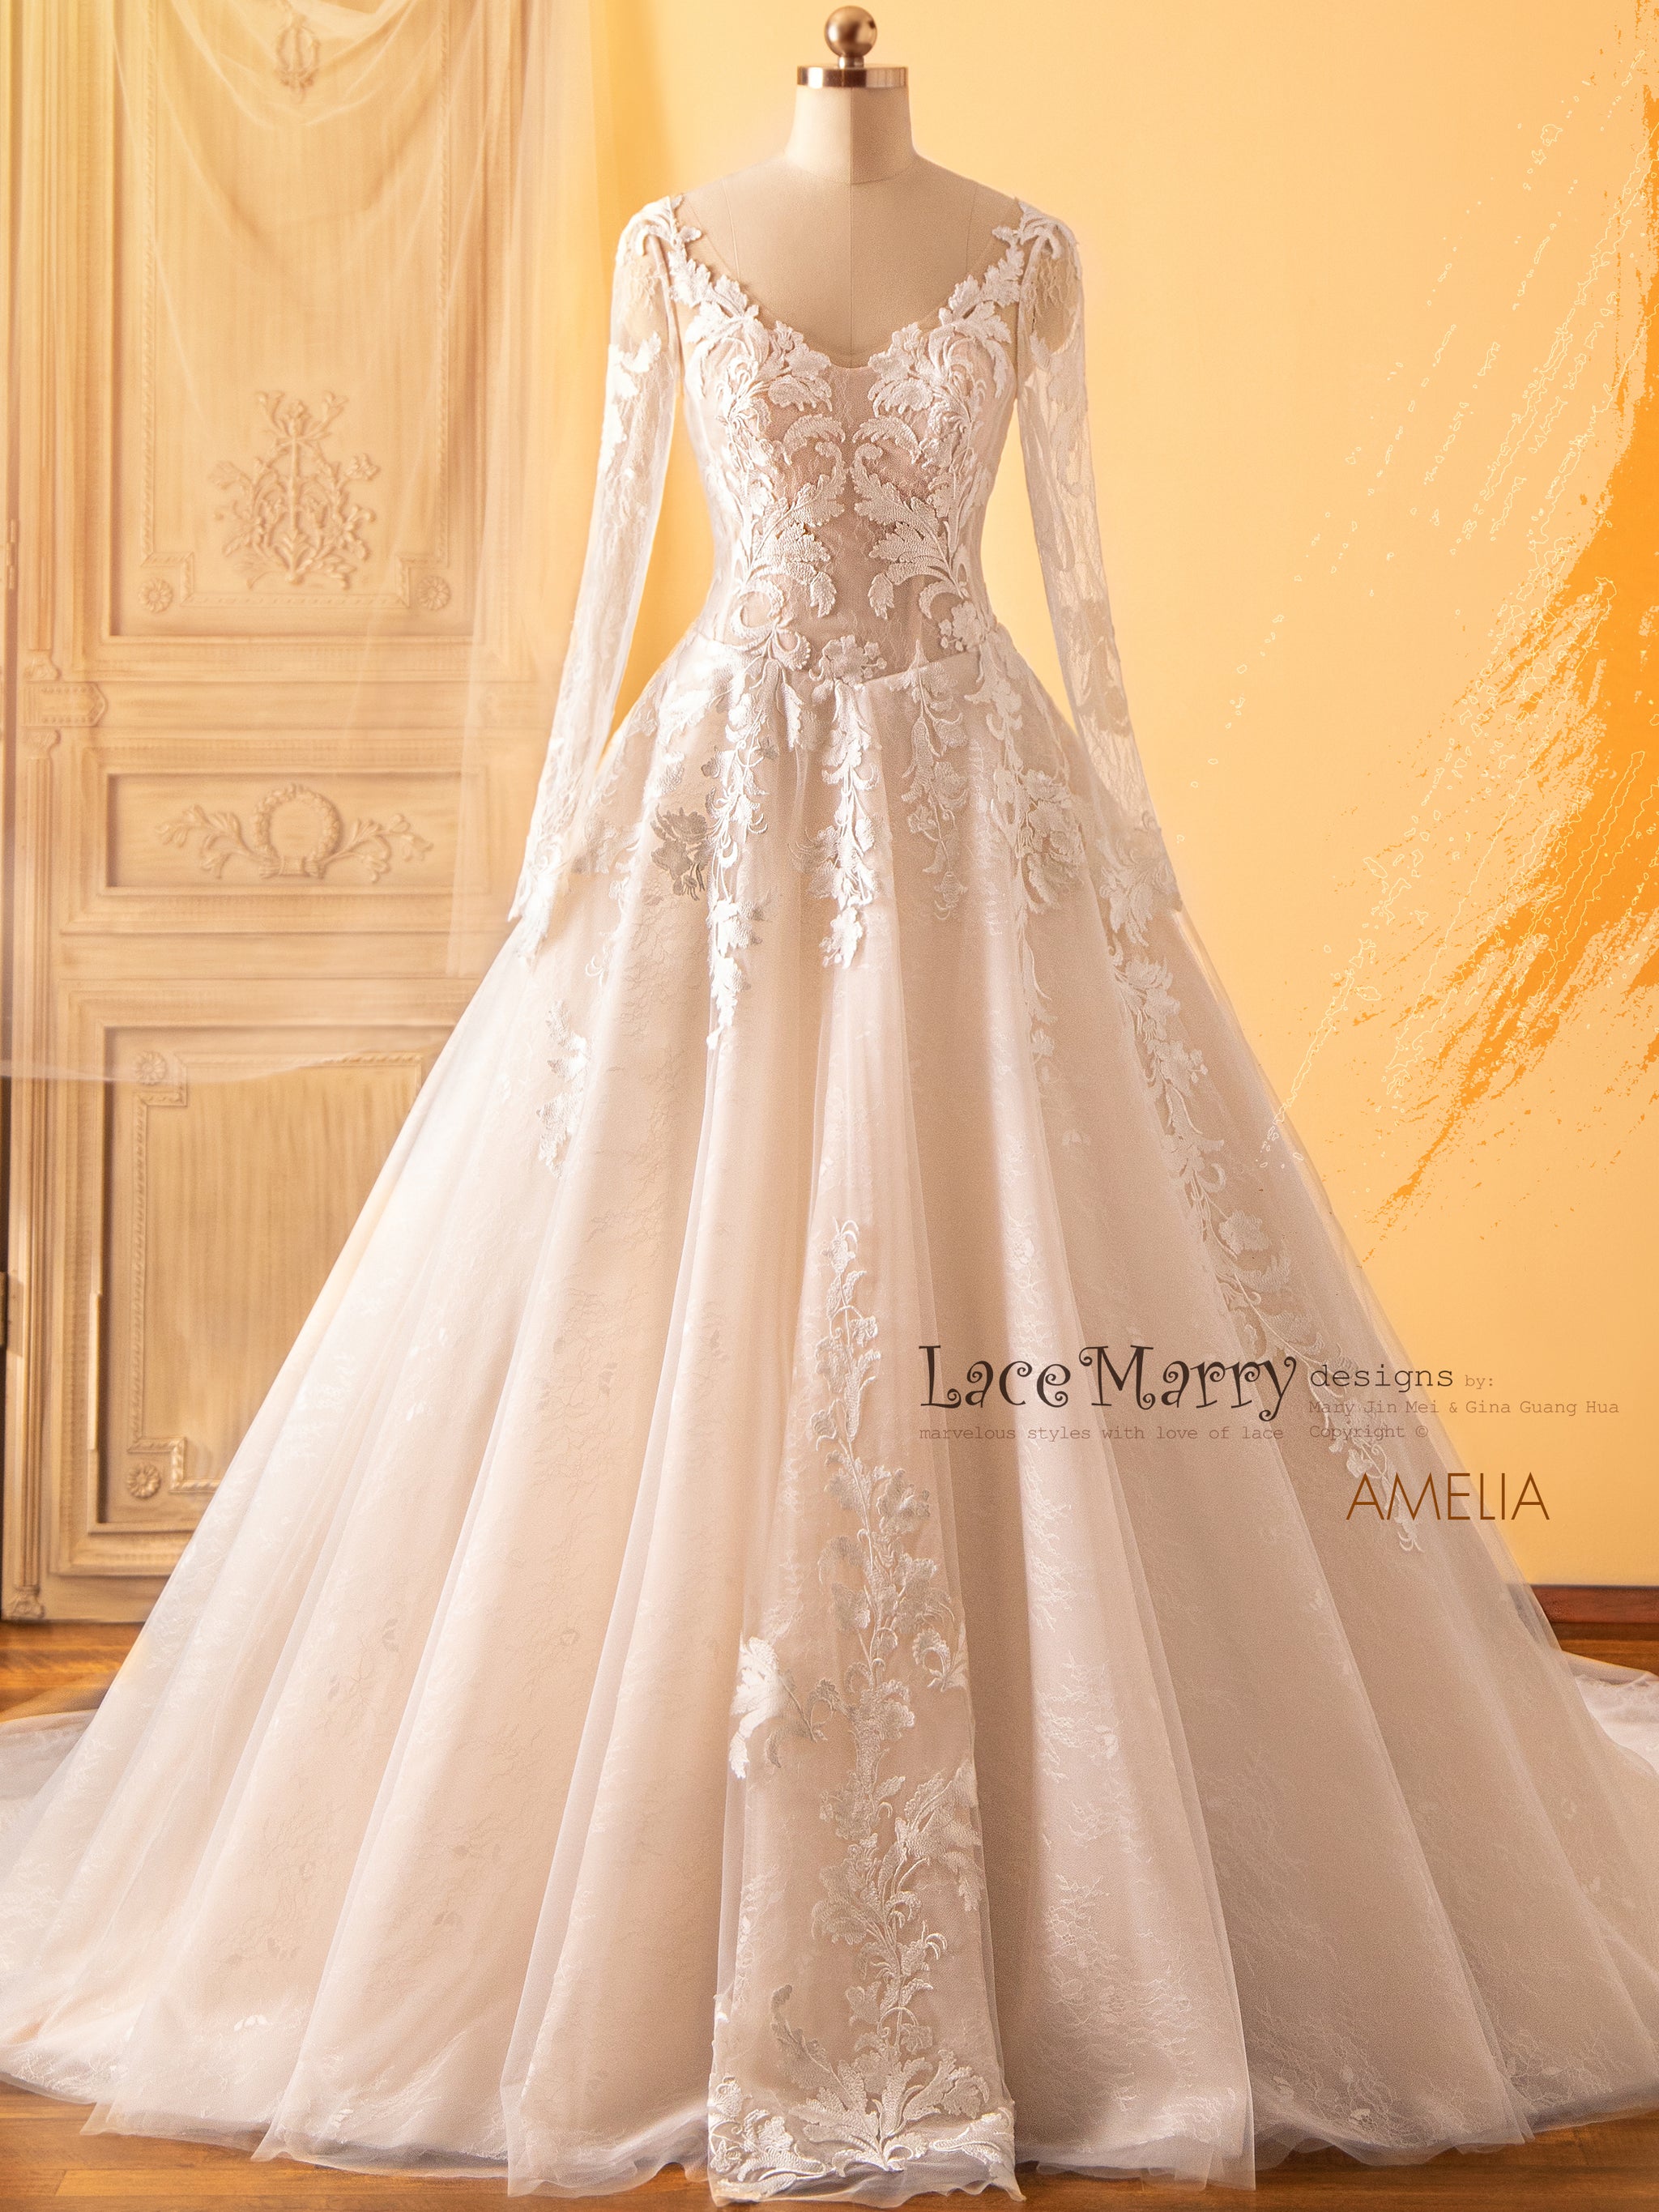 AMELIA / A-Line Wedding Dress with Long Sleeves - LaceMarry